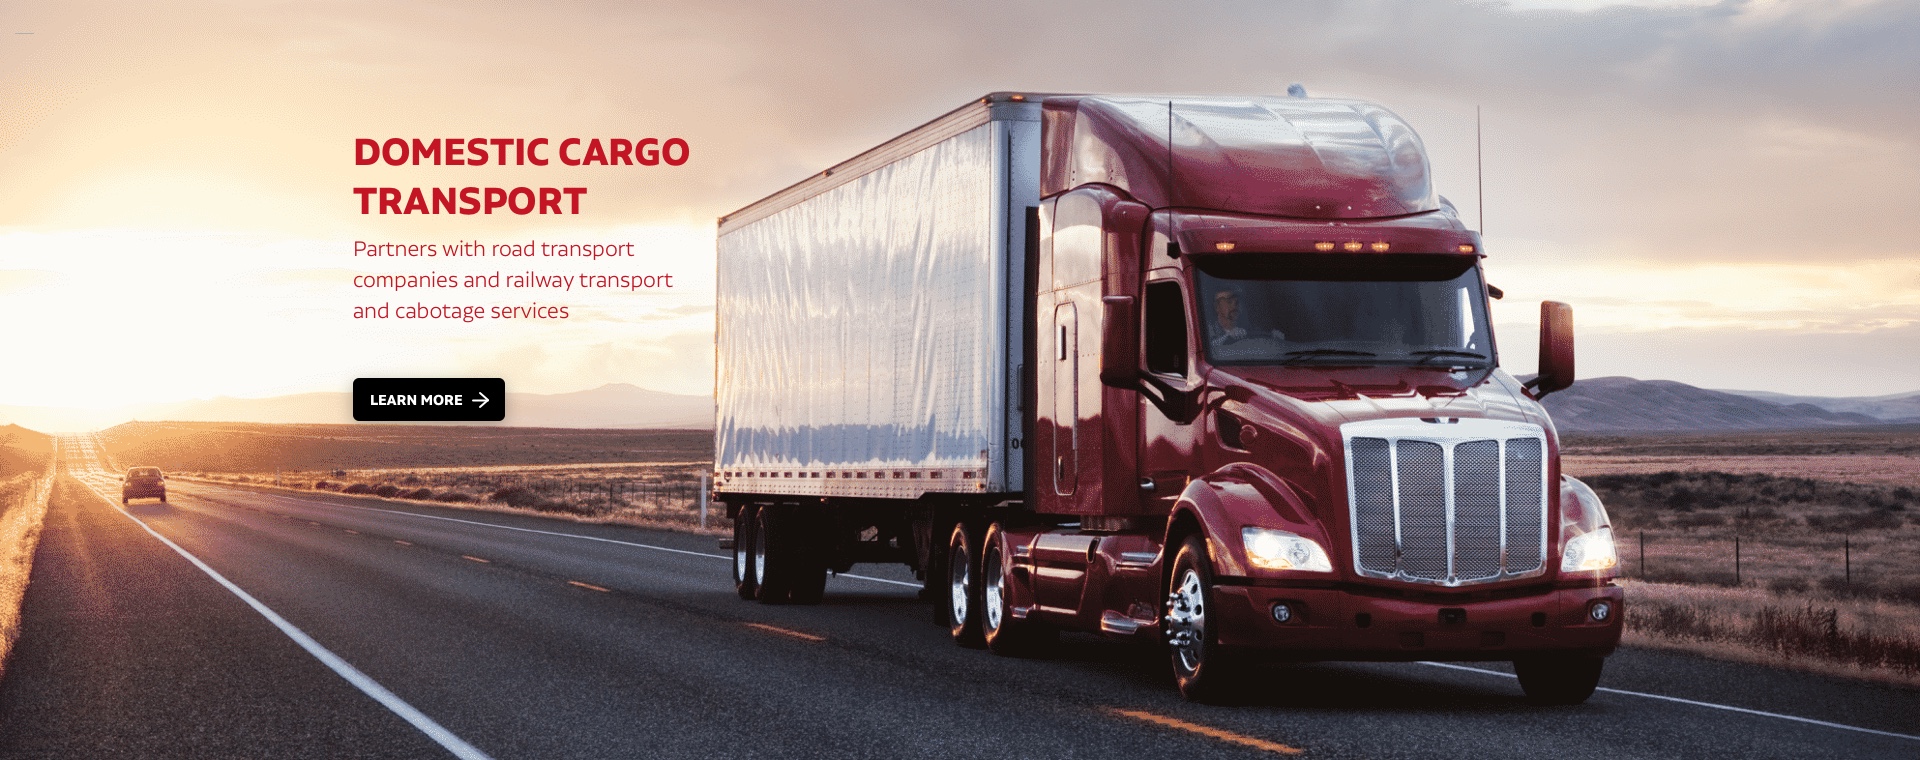 Domestic cargo transport: Partners with road transport companies and railway transport and cabotage services